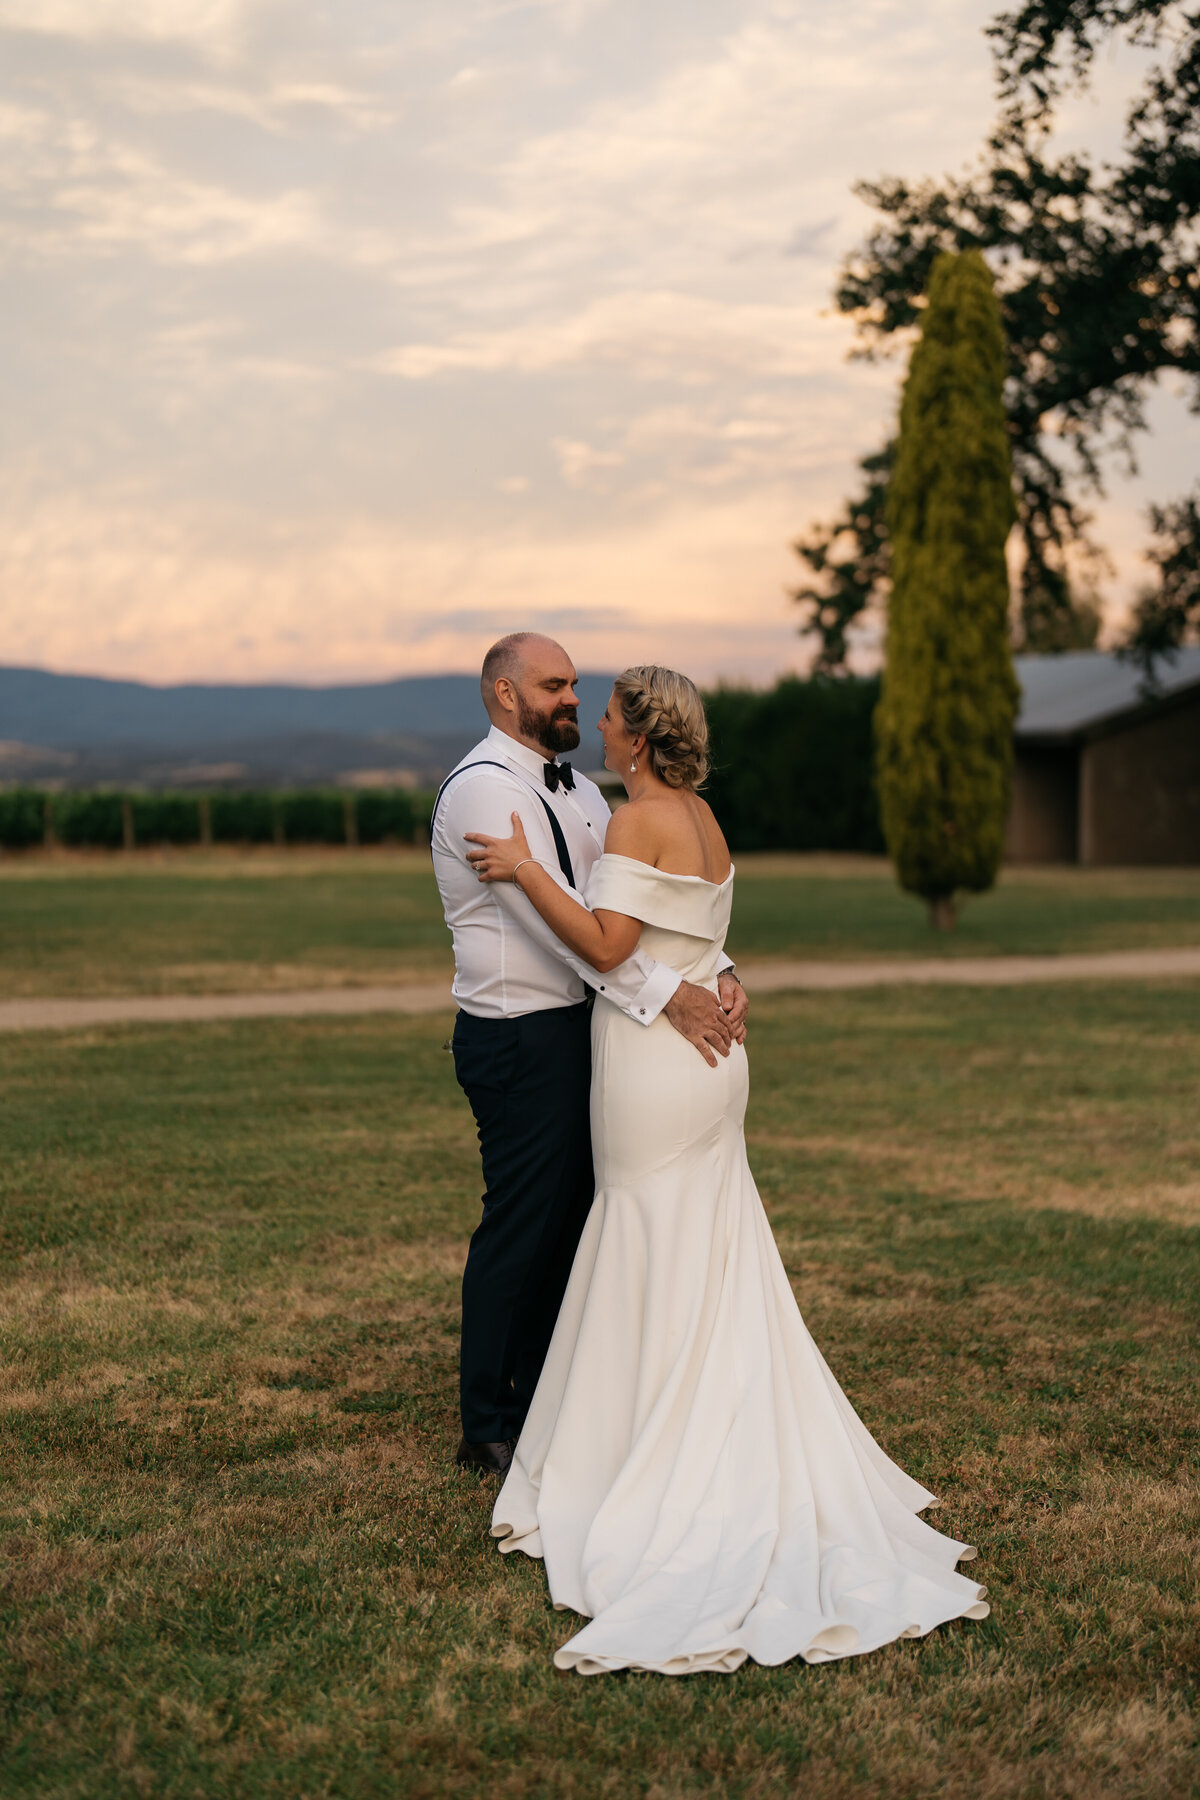 Courtney Laura Photography, Stones of the Yarra Valley, Yarra Valley Weddings Photographer, Samantha and Kyle-1028